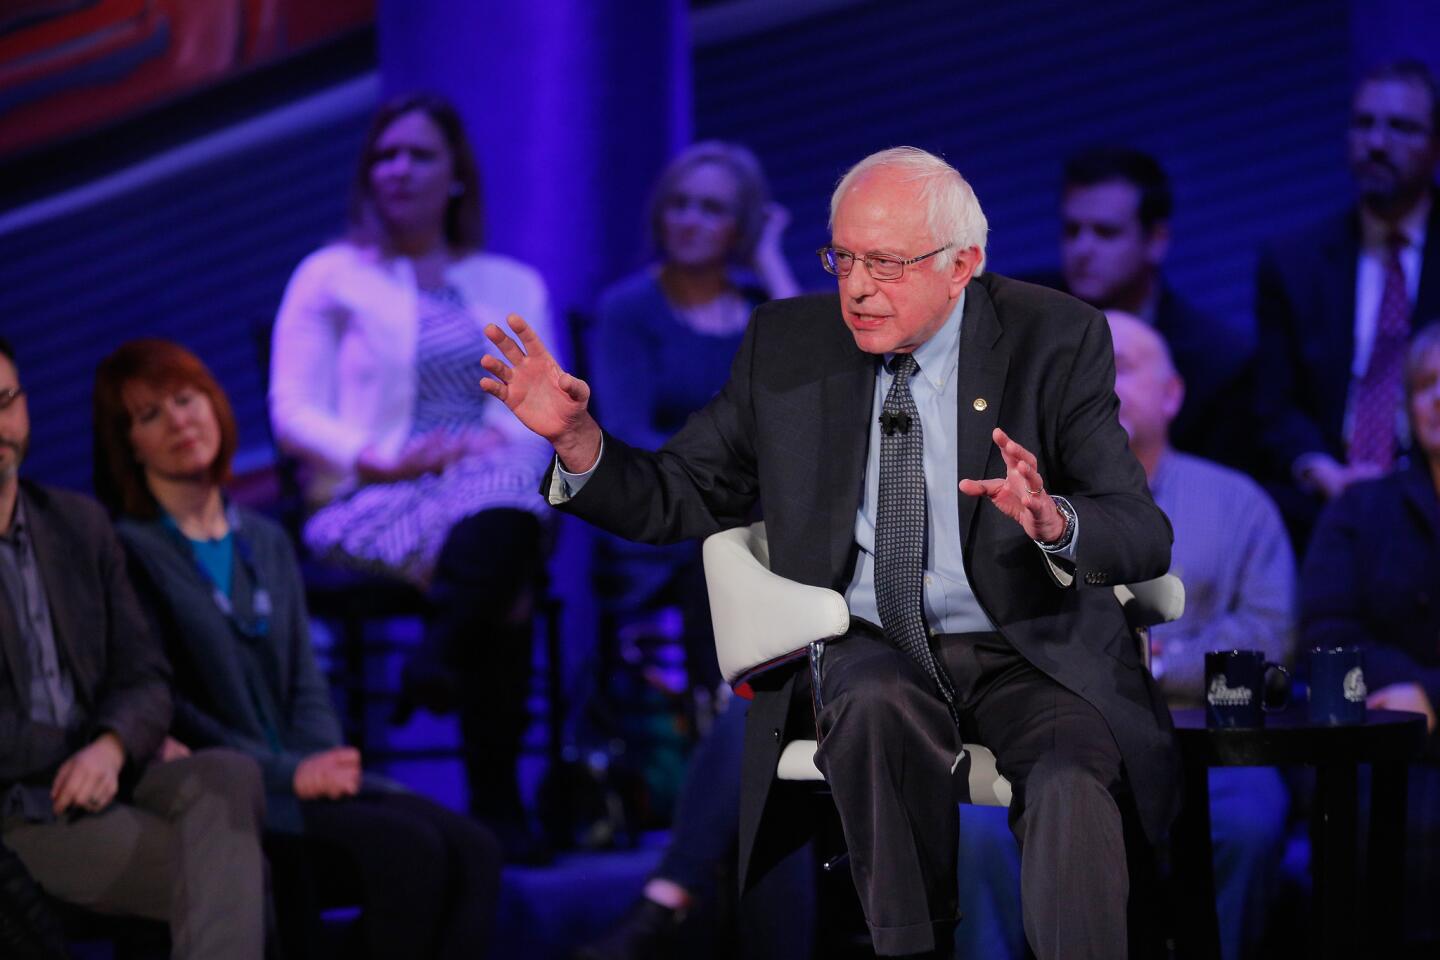 Democratic presidential candidate Bernie Sanders participates in a town hall forum hosted by CNN at Drake University in Des Moines.